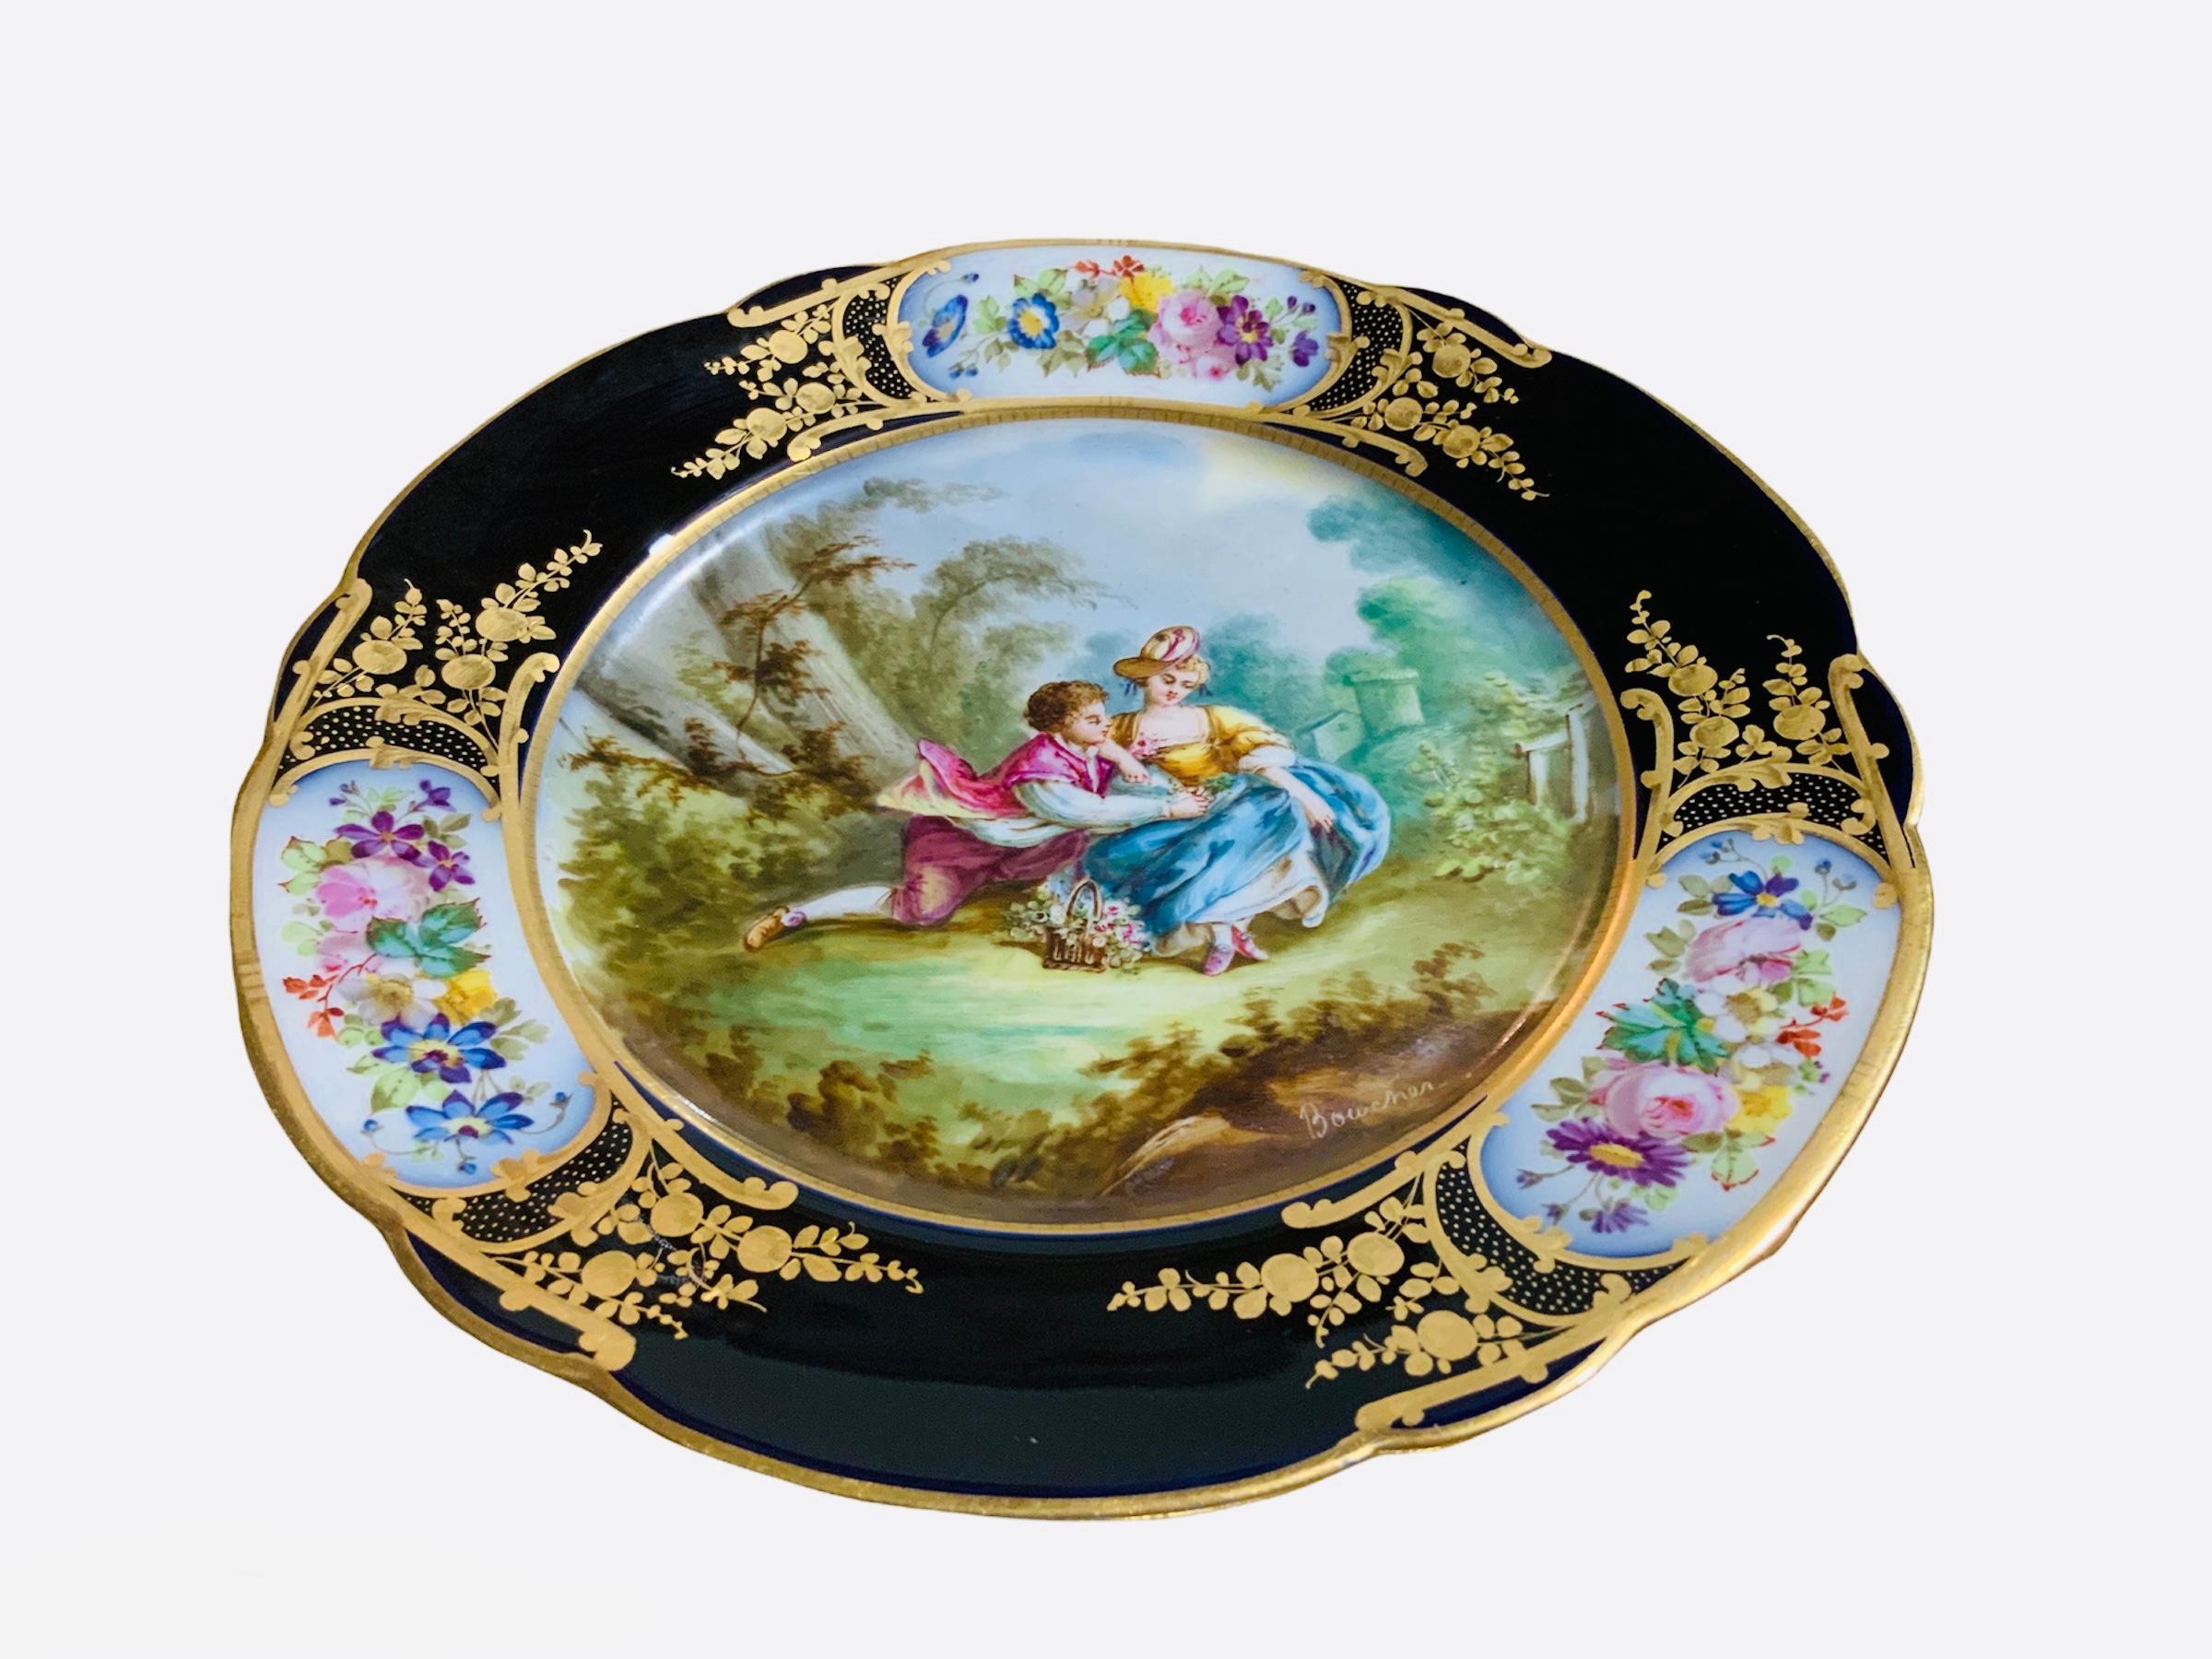 This is a Chateau de Tuileries Sevres Style hand painted cabinet porcelain plate. It depicts a pastoral scene of a courting couple in the center with a gilt cobalt blue circular rim. The rim is adorned with three bouquets of flowers framed with gilt